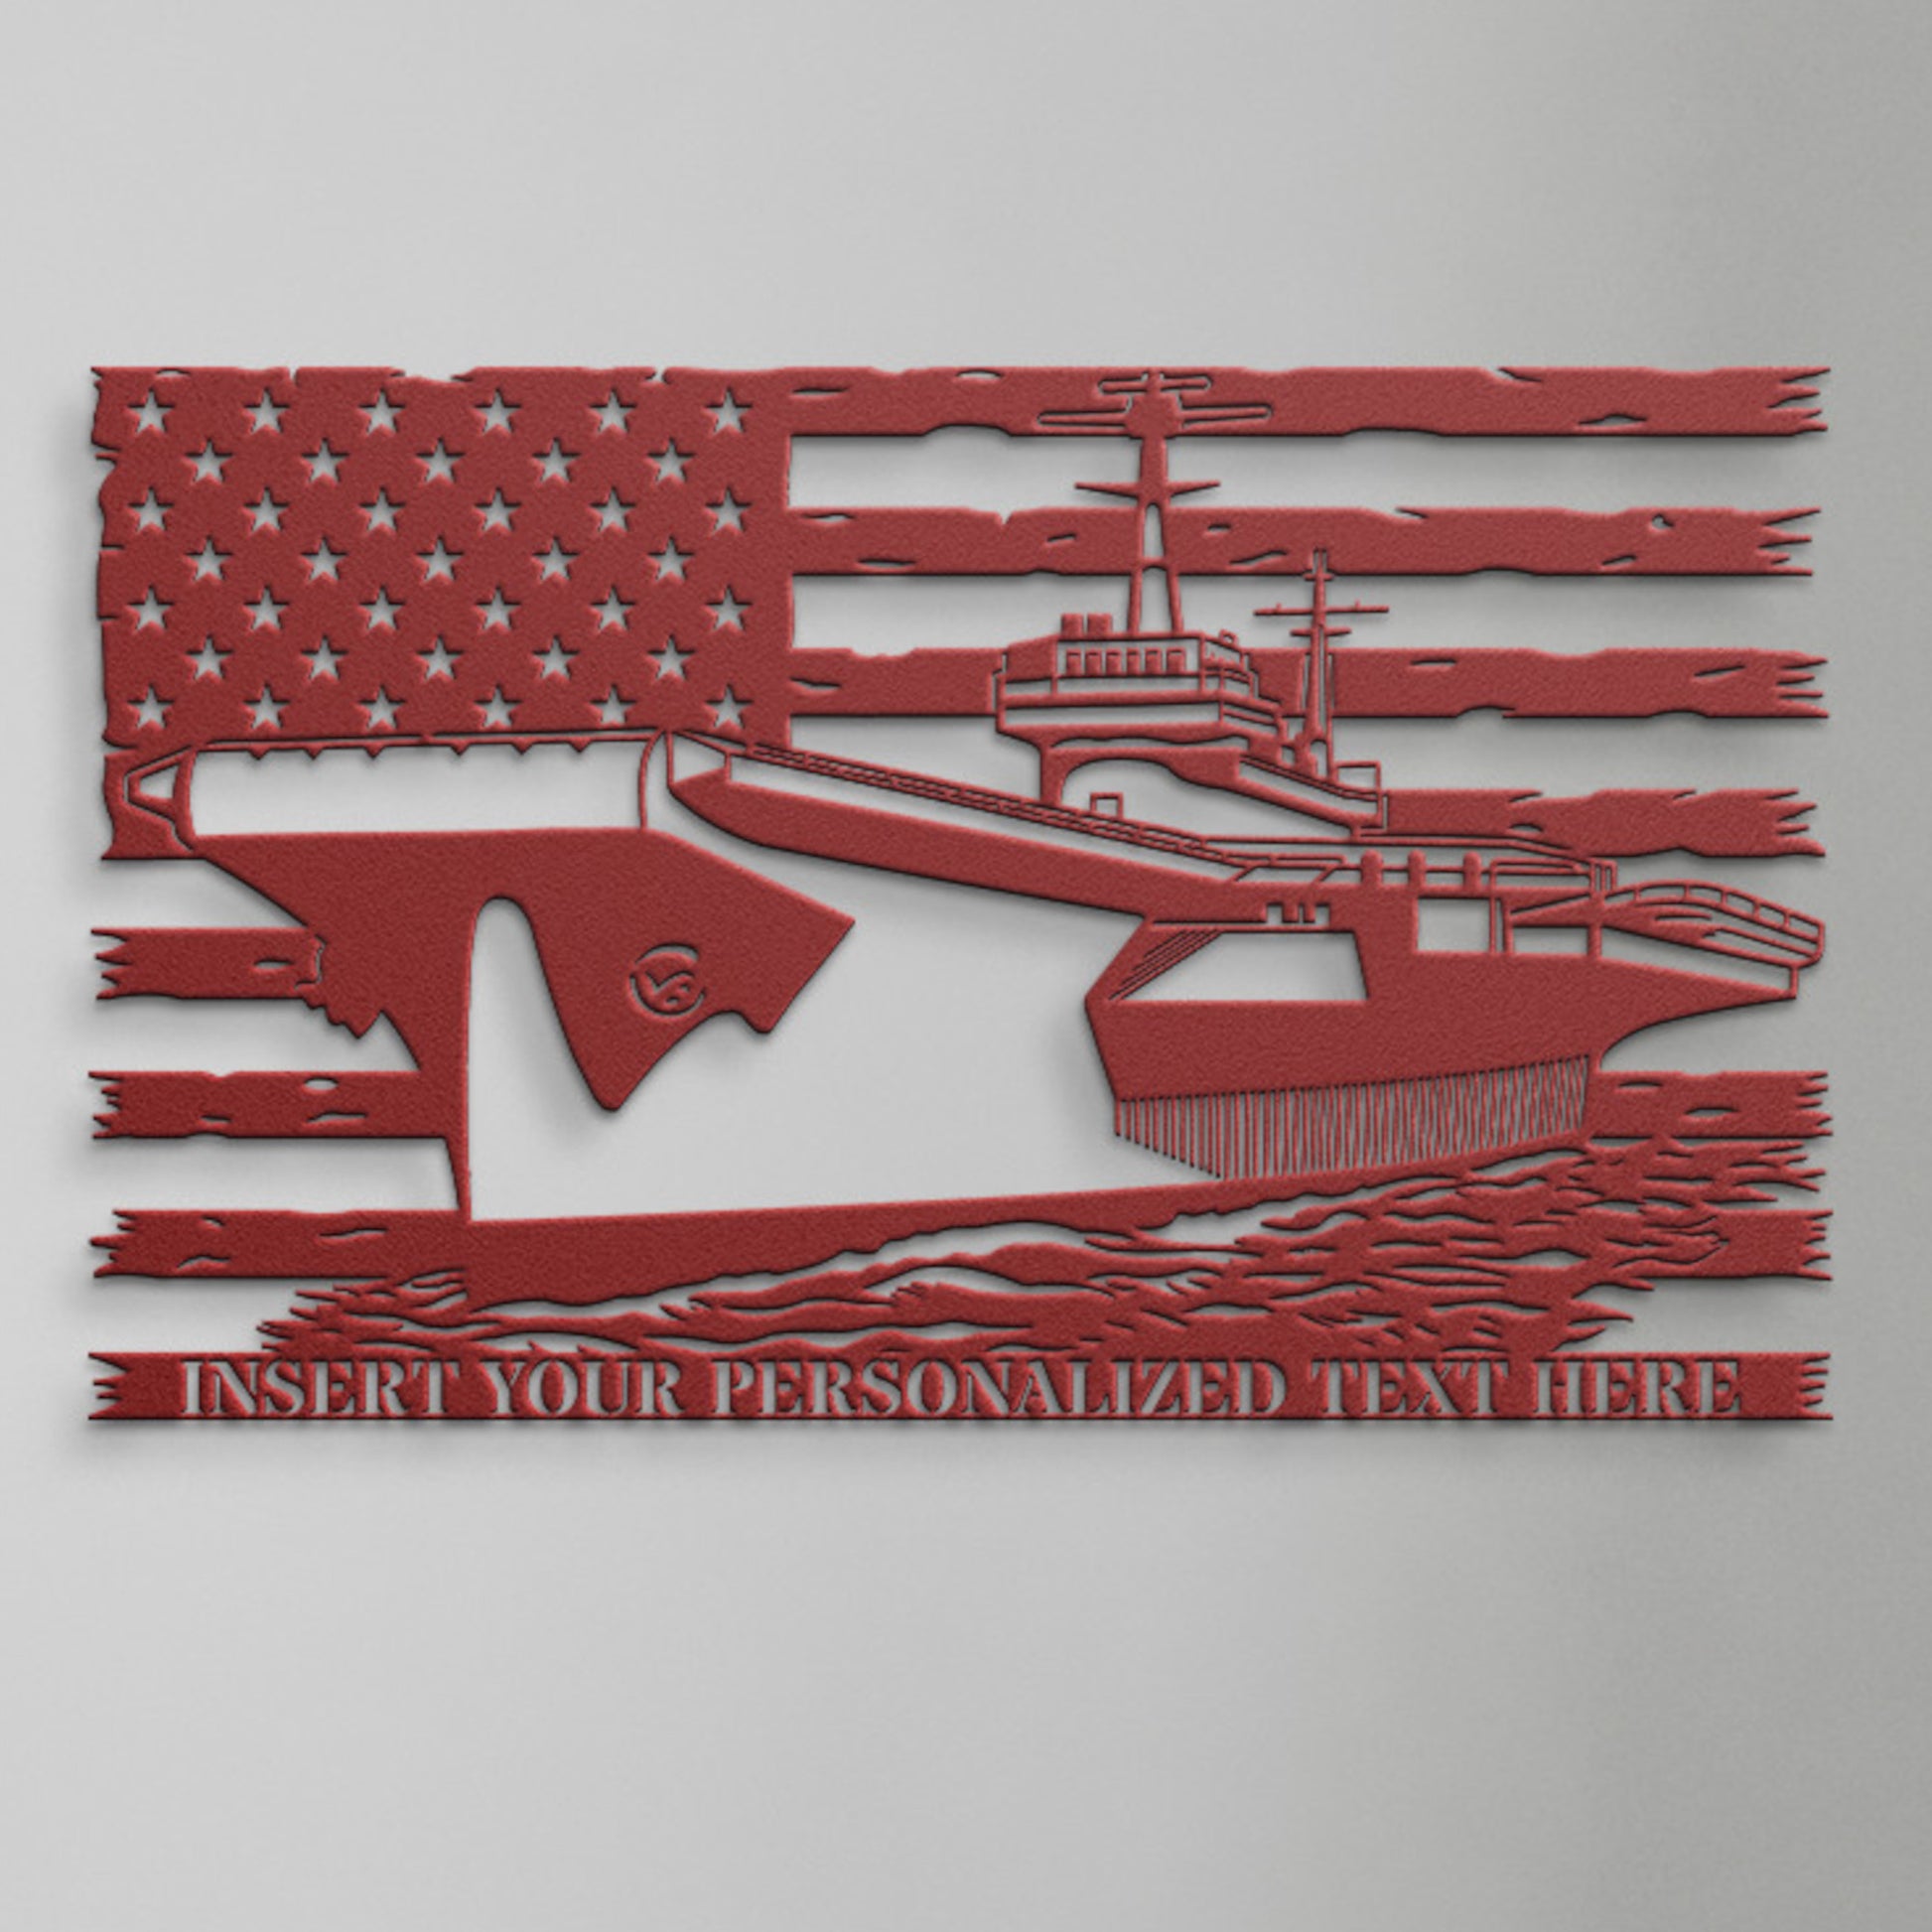 Personalized US Battleship Name Metal Sign Gift. Customizable Aircraft Carrier Sign. Custom Navy Wall Decor. Military Tribute Gift. Army Art